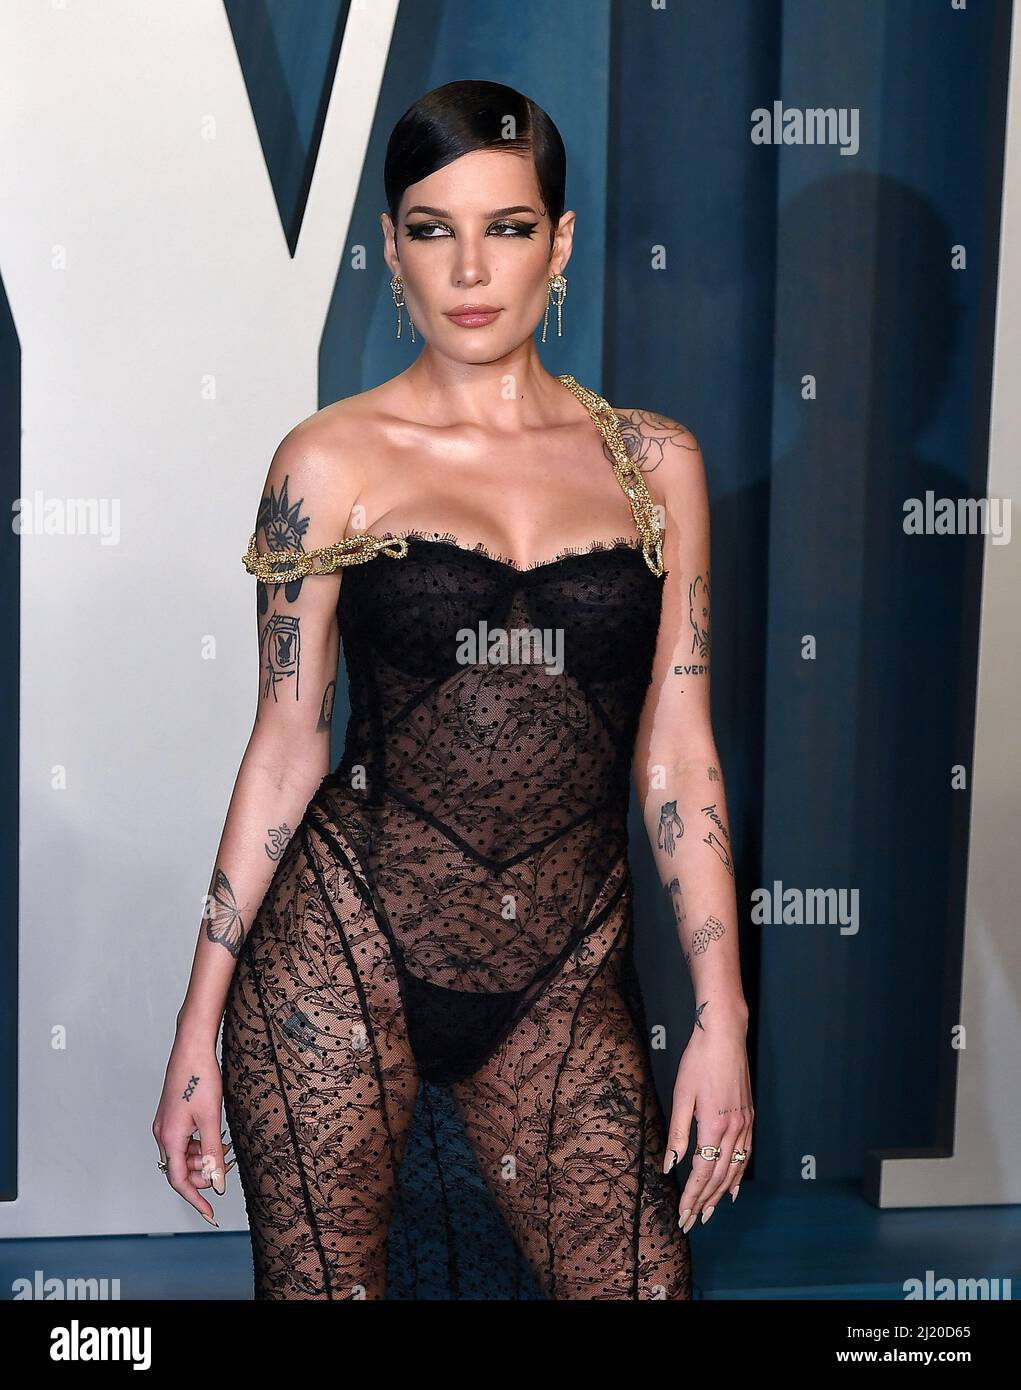 Halsey attends the 2022 Vanity Fair Oscar Party at the Wallis Annenberg Center for the Performing Arts on March 27, 2022 in Beverly Hills, California. Photo: Casey Flanigan/imageSPACE/MediaPunch Stock Photo